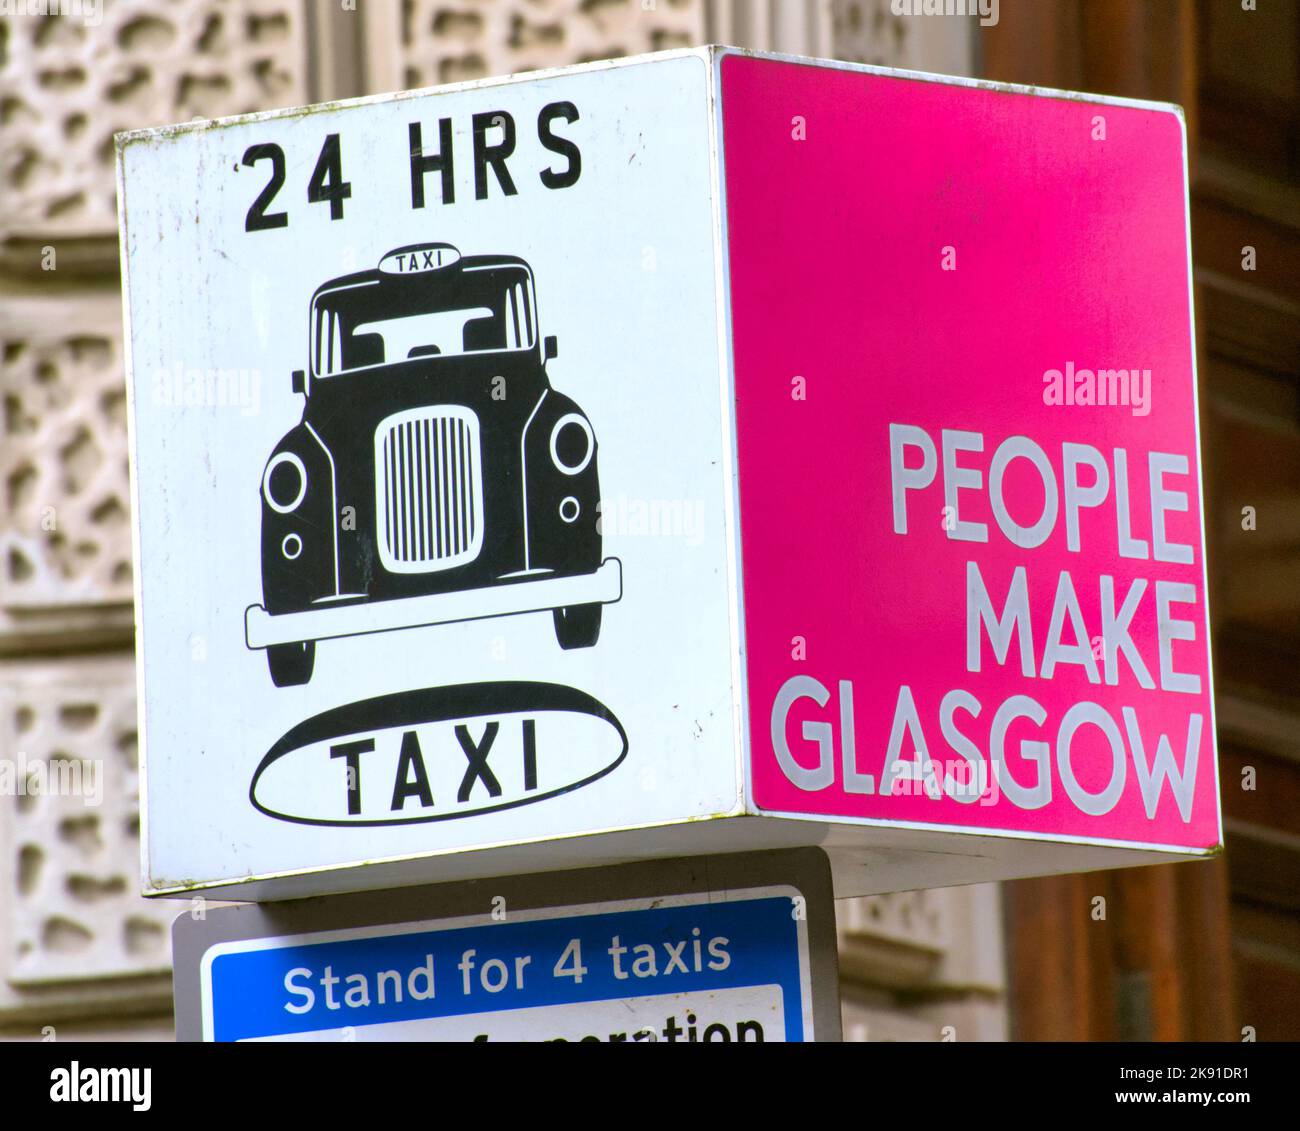 taxi stance sign 24 hour people make glasgow Stock Photo